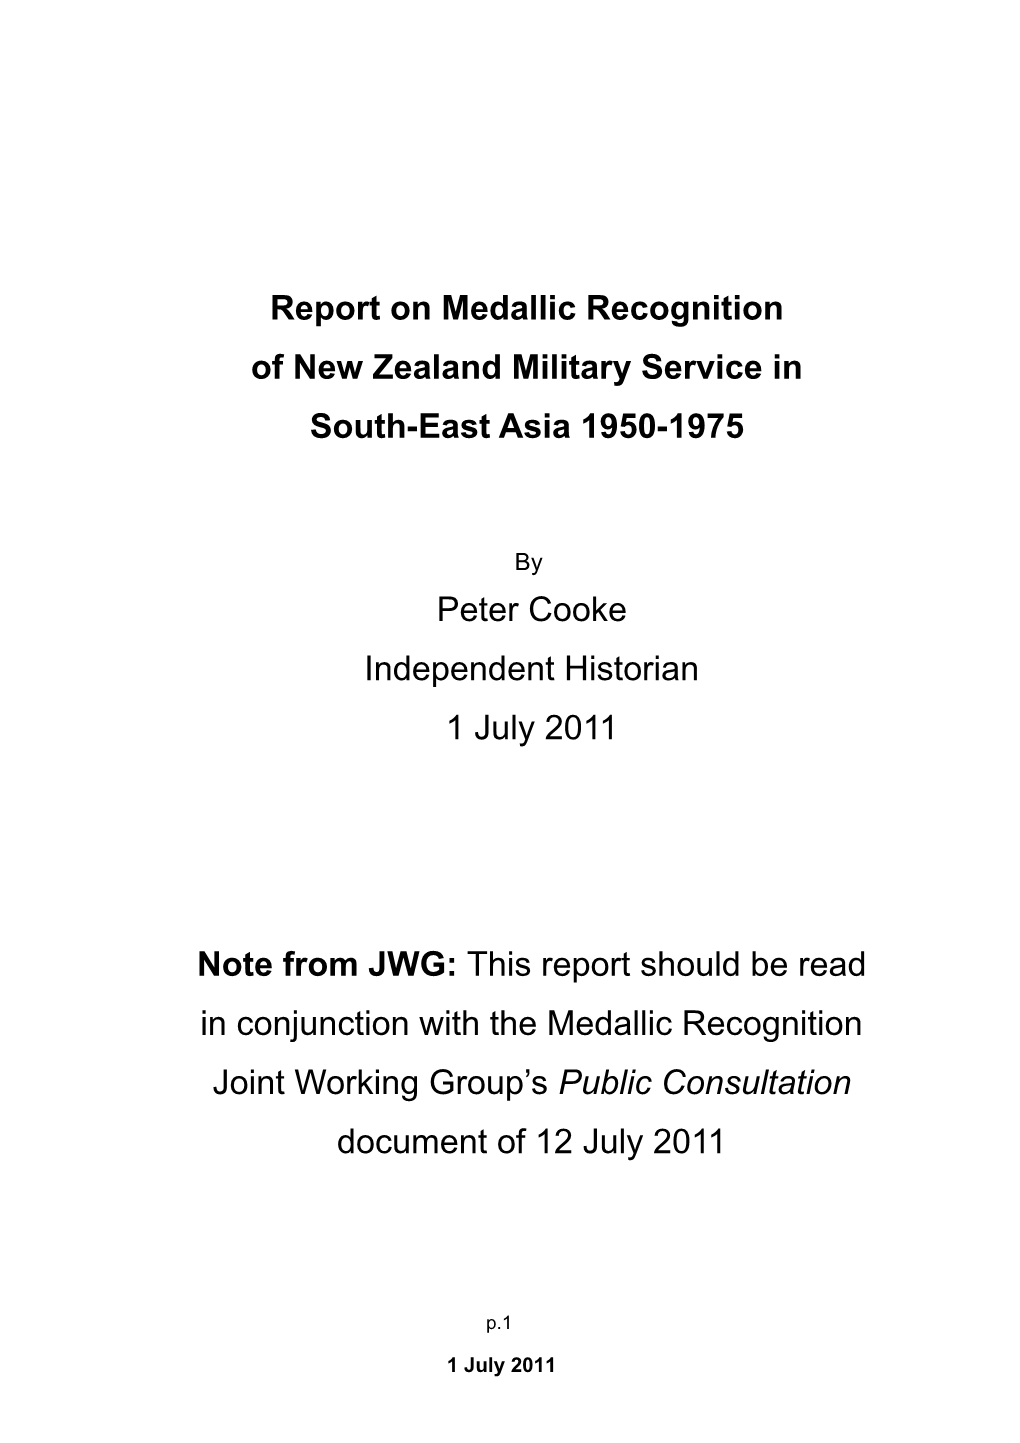 Report on Medallic Recognition